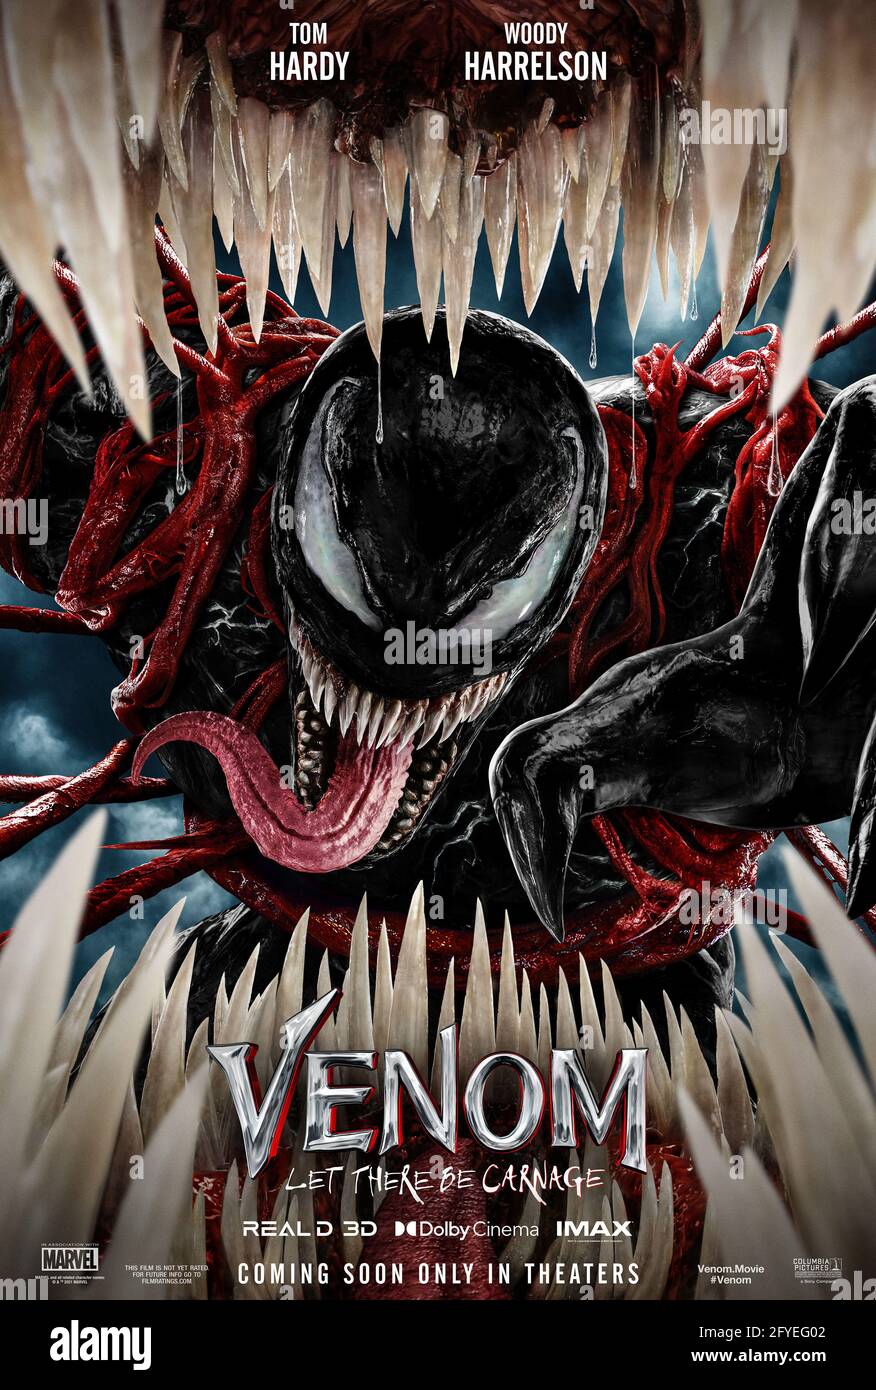 Venom Let There Be Carnage 2021 Dual Audio Hindi ORG (Clean) 500MB HDRip 720p HEVC x265 ESubs Download